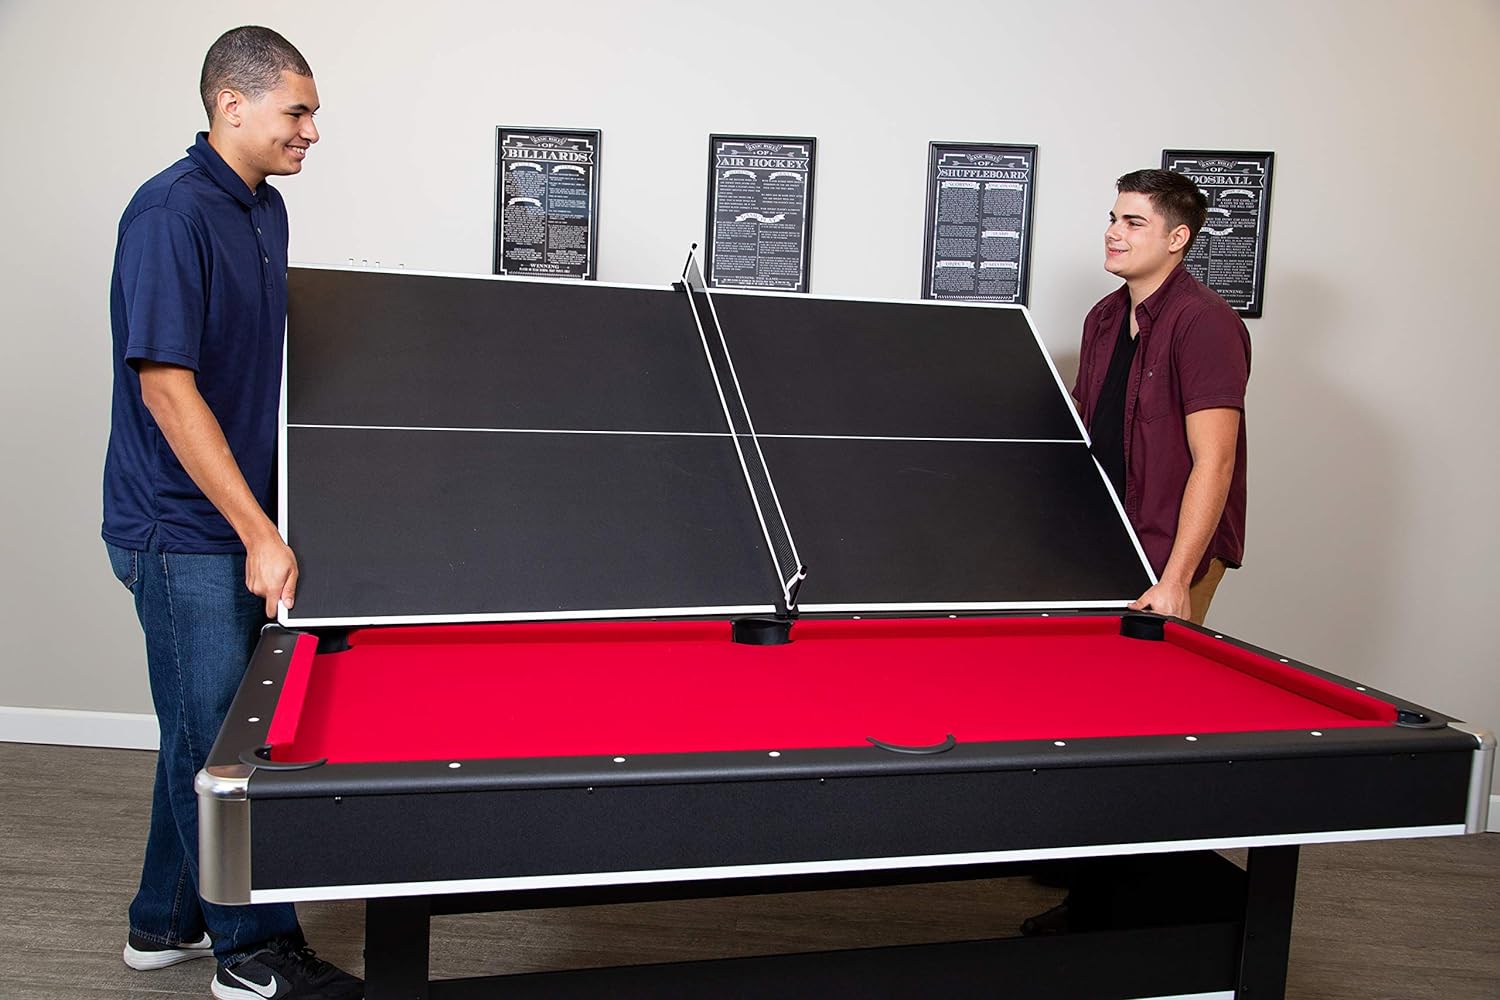 Spartan 6-ft Pool Table with Table Tennis Top - Black with Red Felt - $335